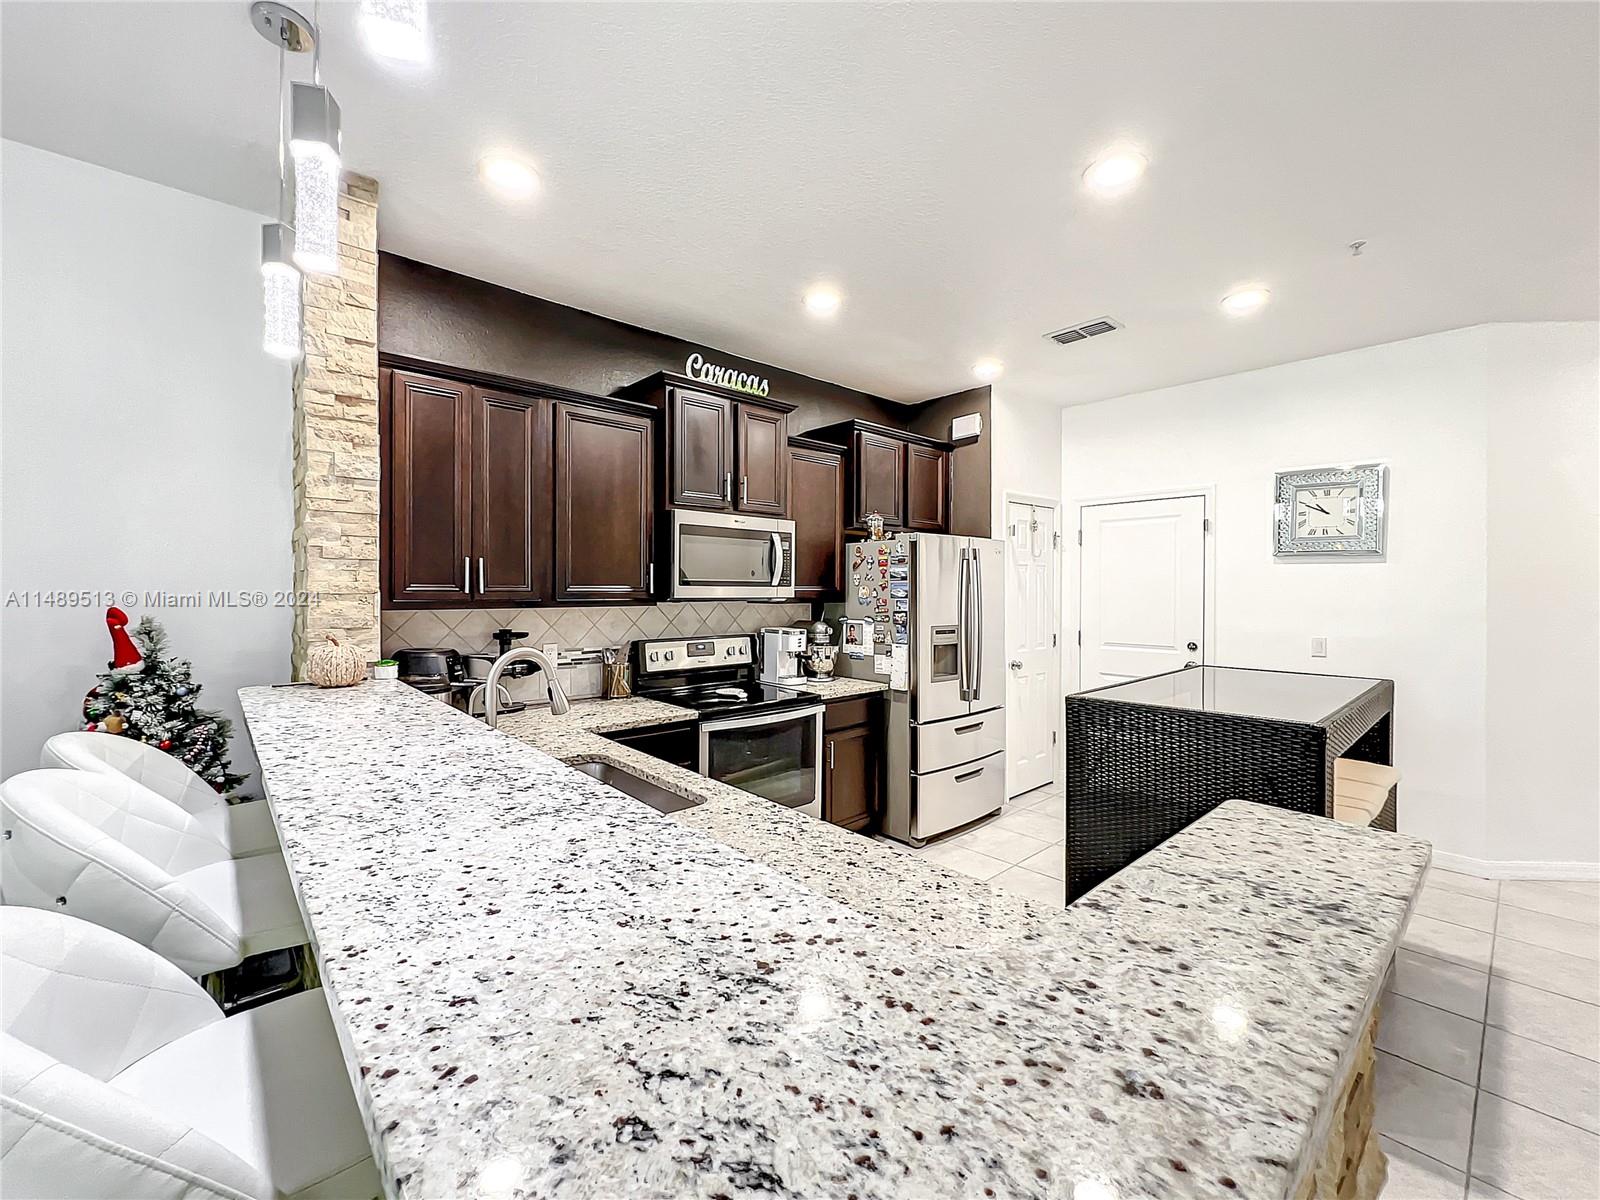 a kitchen with stainless steel appliances kitchen island granite countertop a refrigerator sink and wooden cabinets